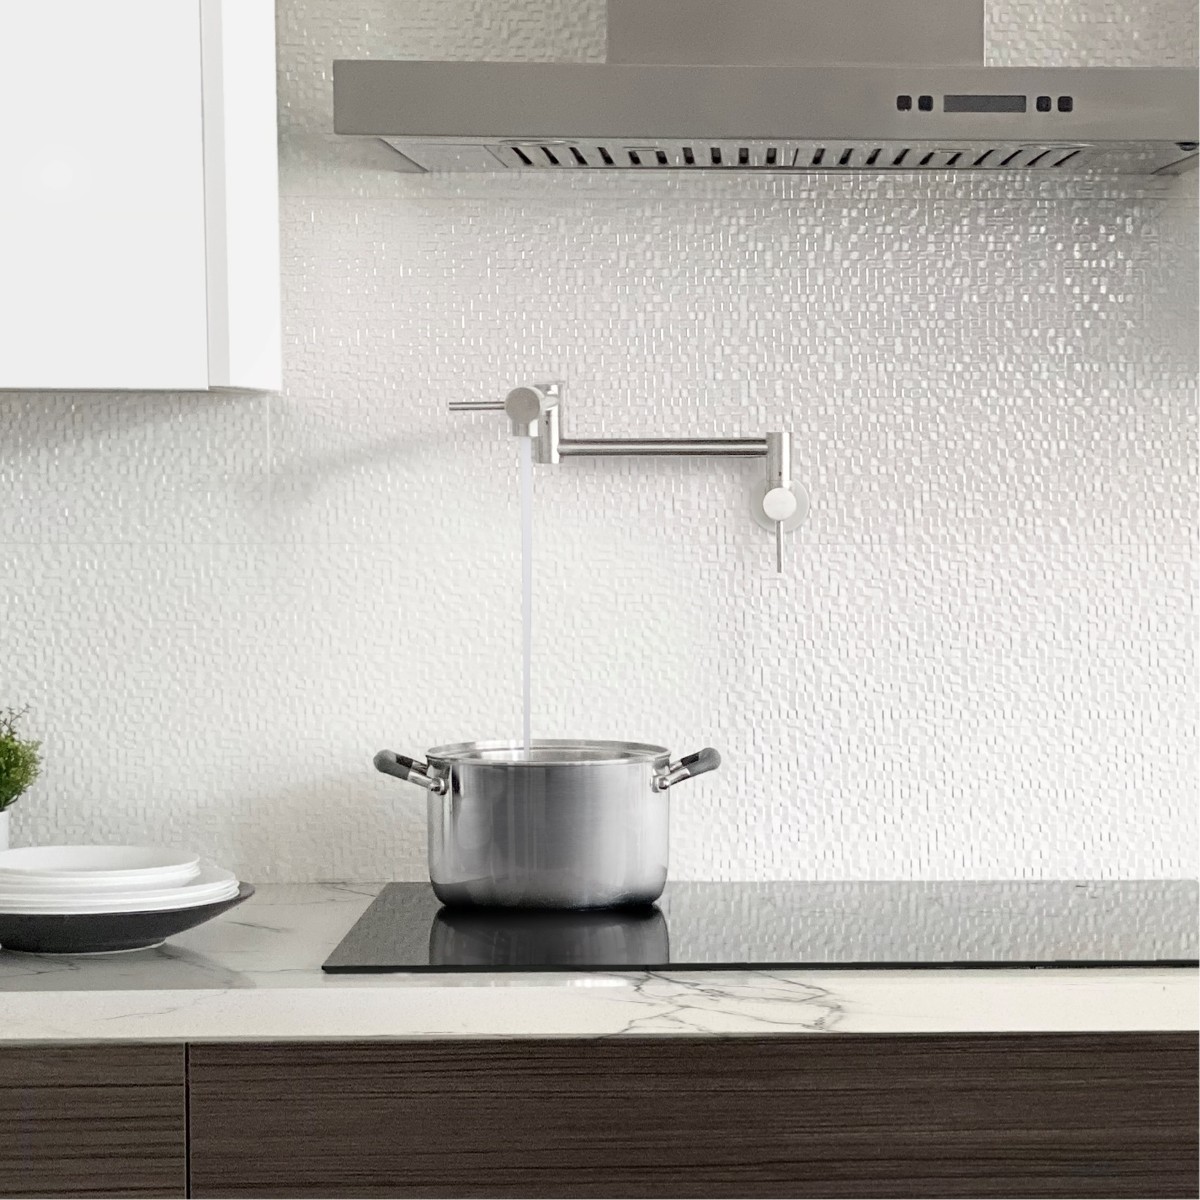 STYLISH Stainless Steel Wall Mount Pot Filler Folding Stretchable with  Single Hole Two Handles